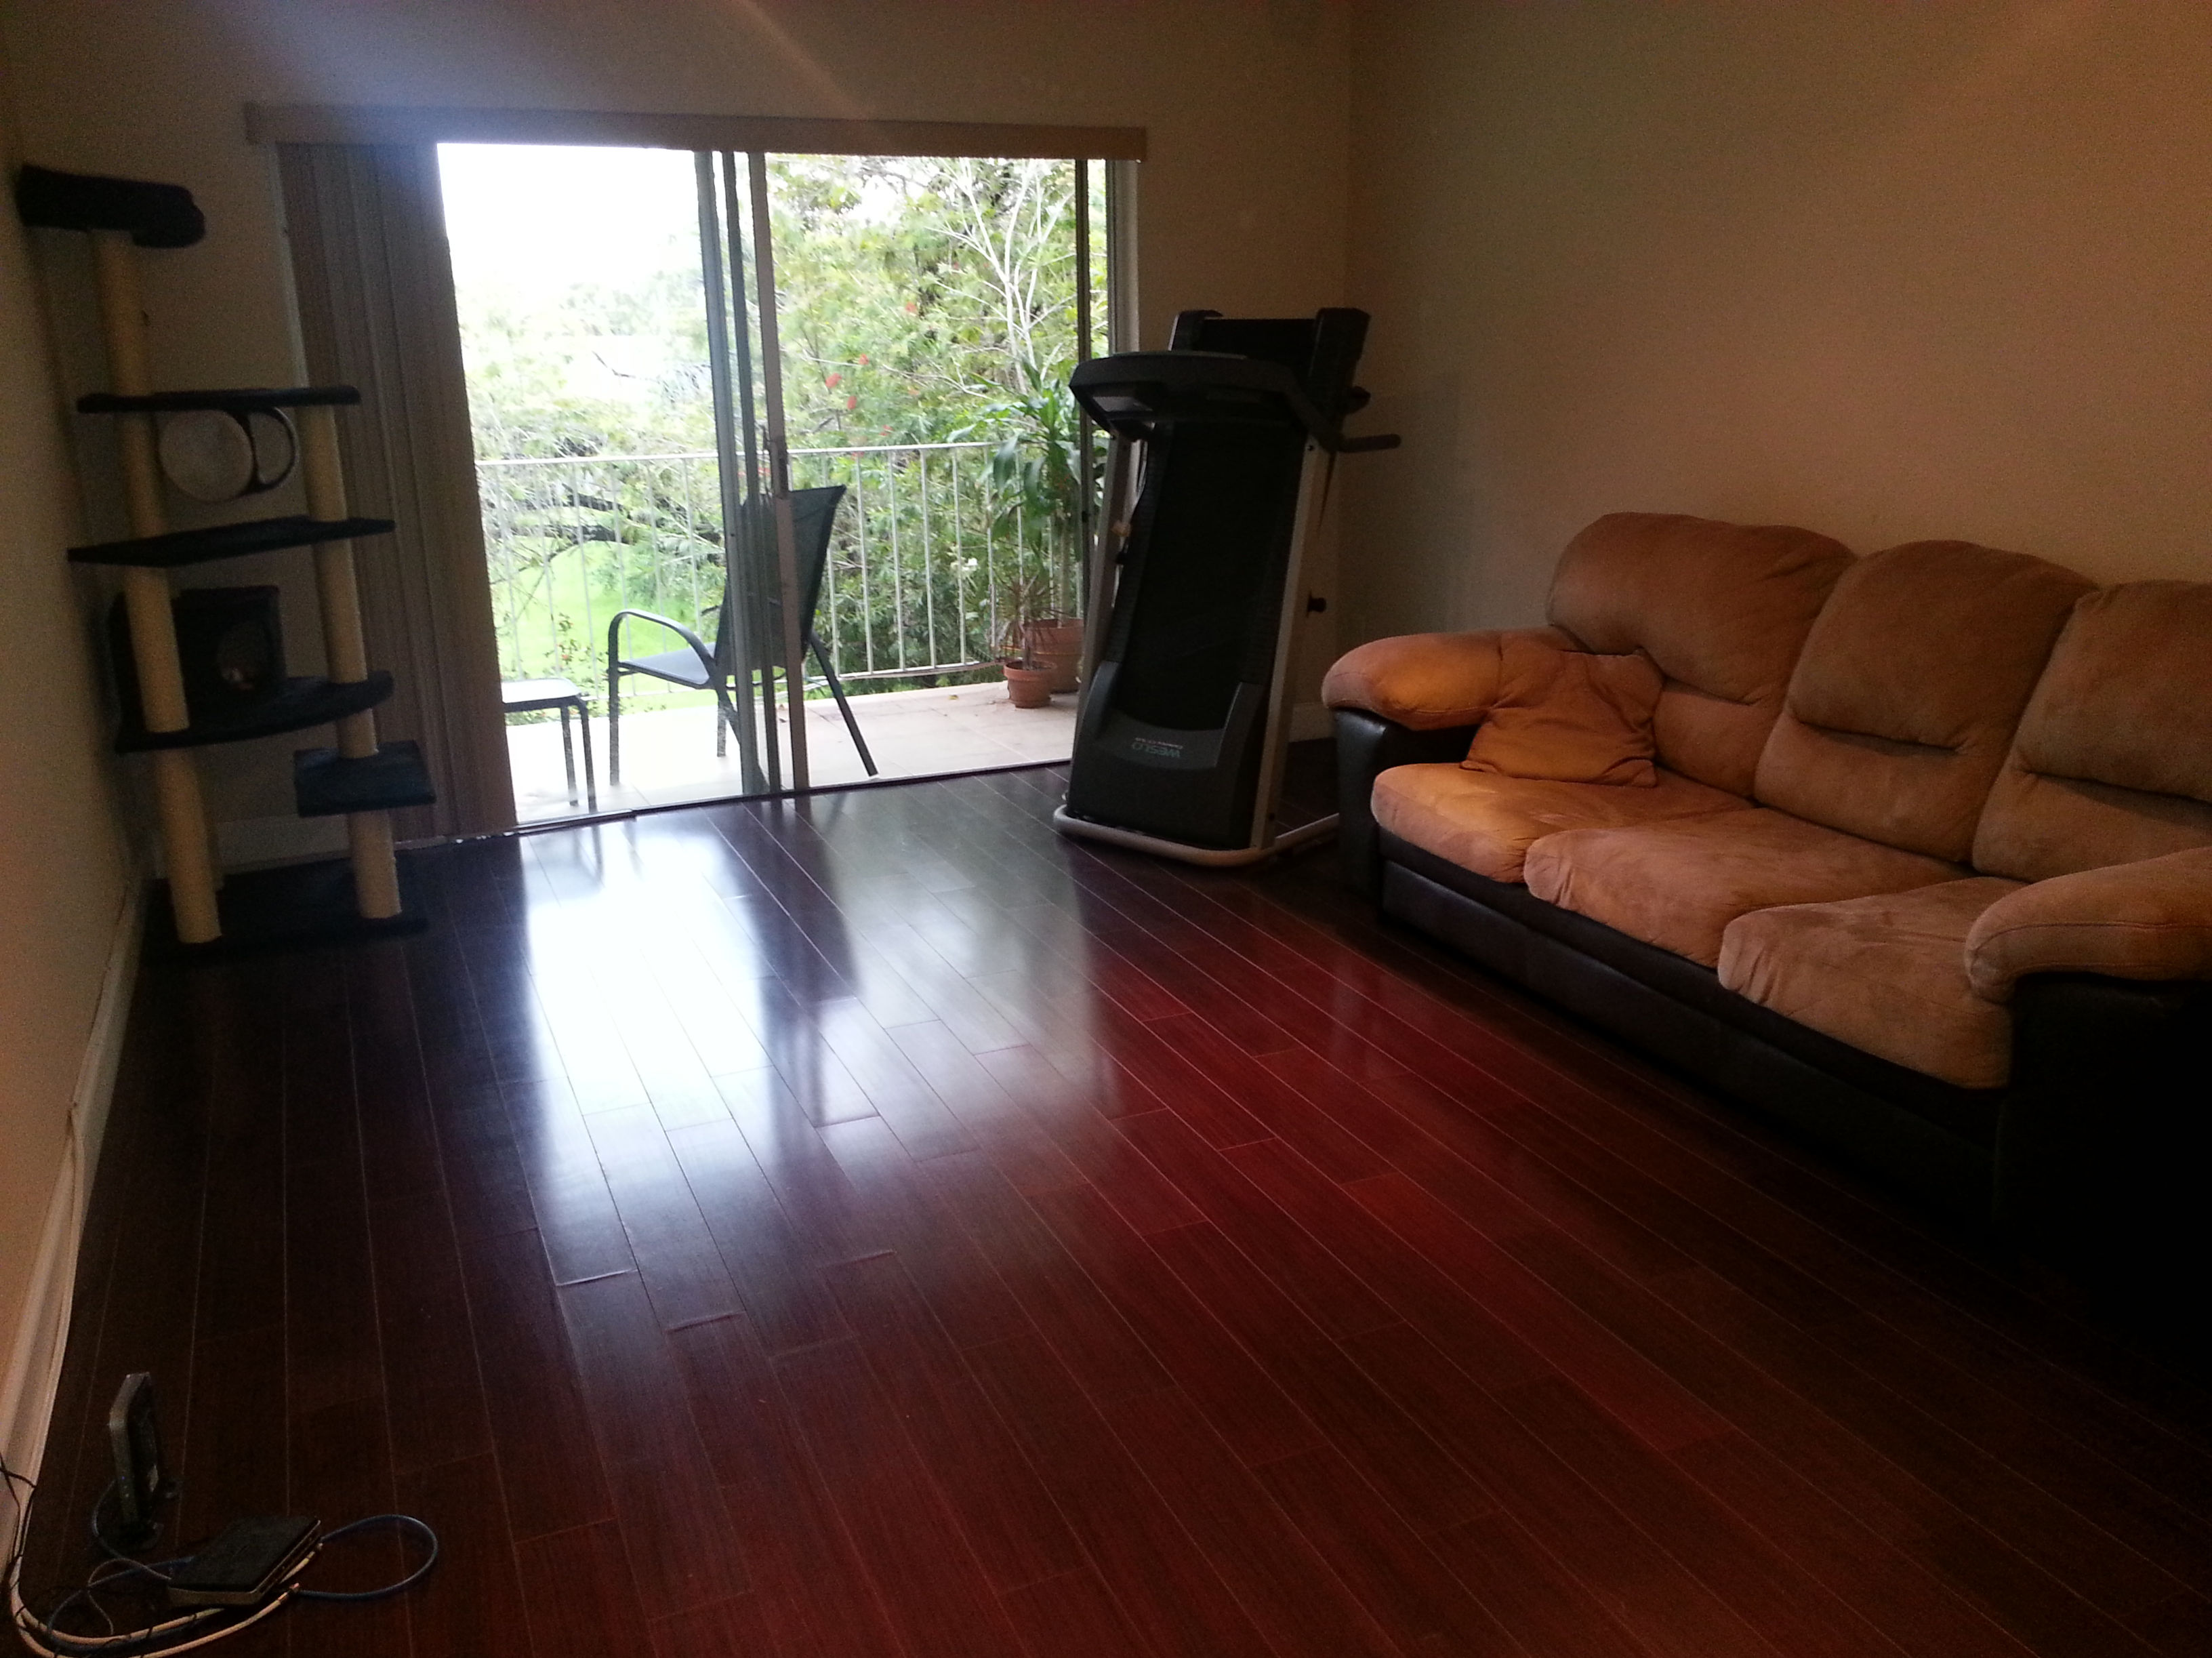 The living room of our Village At Dadeland condo, located in Miami, Florida